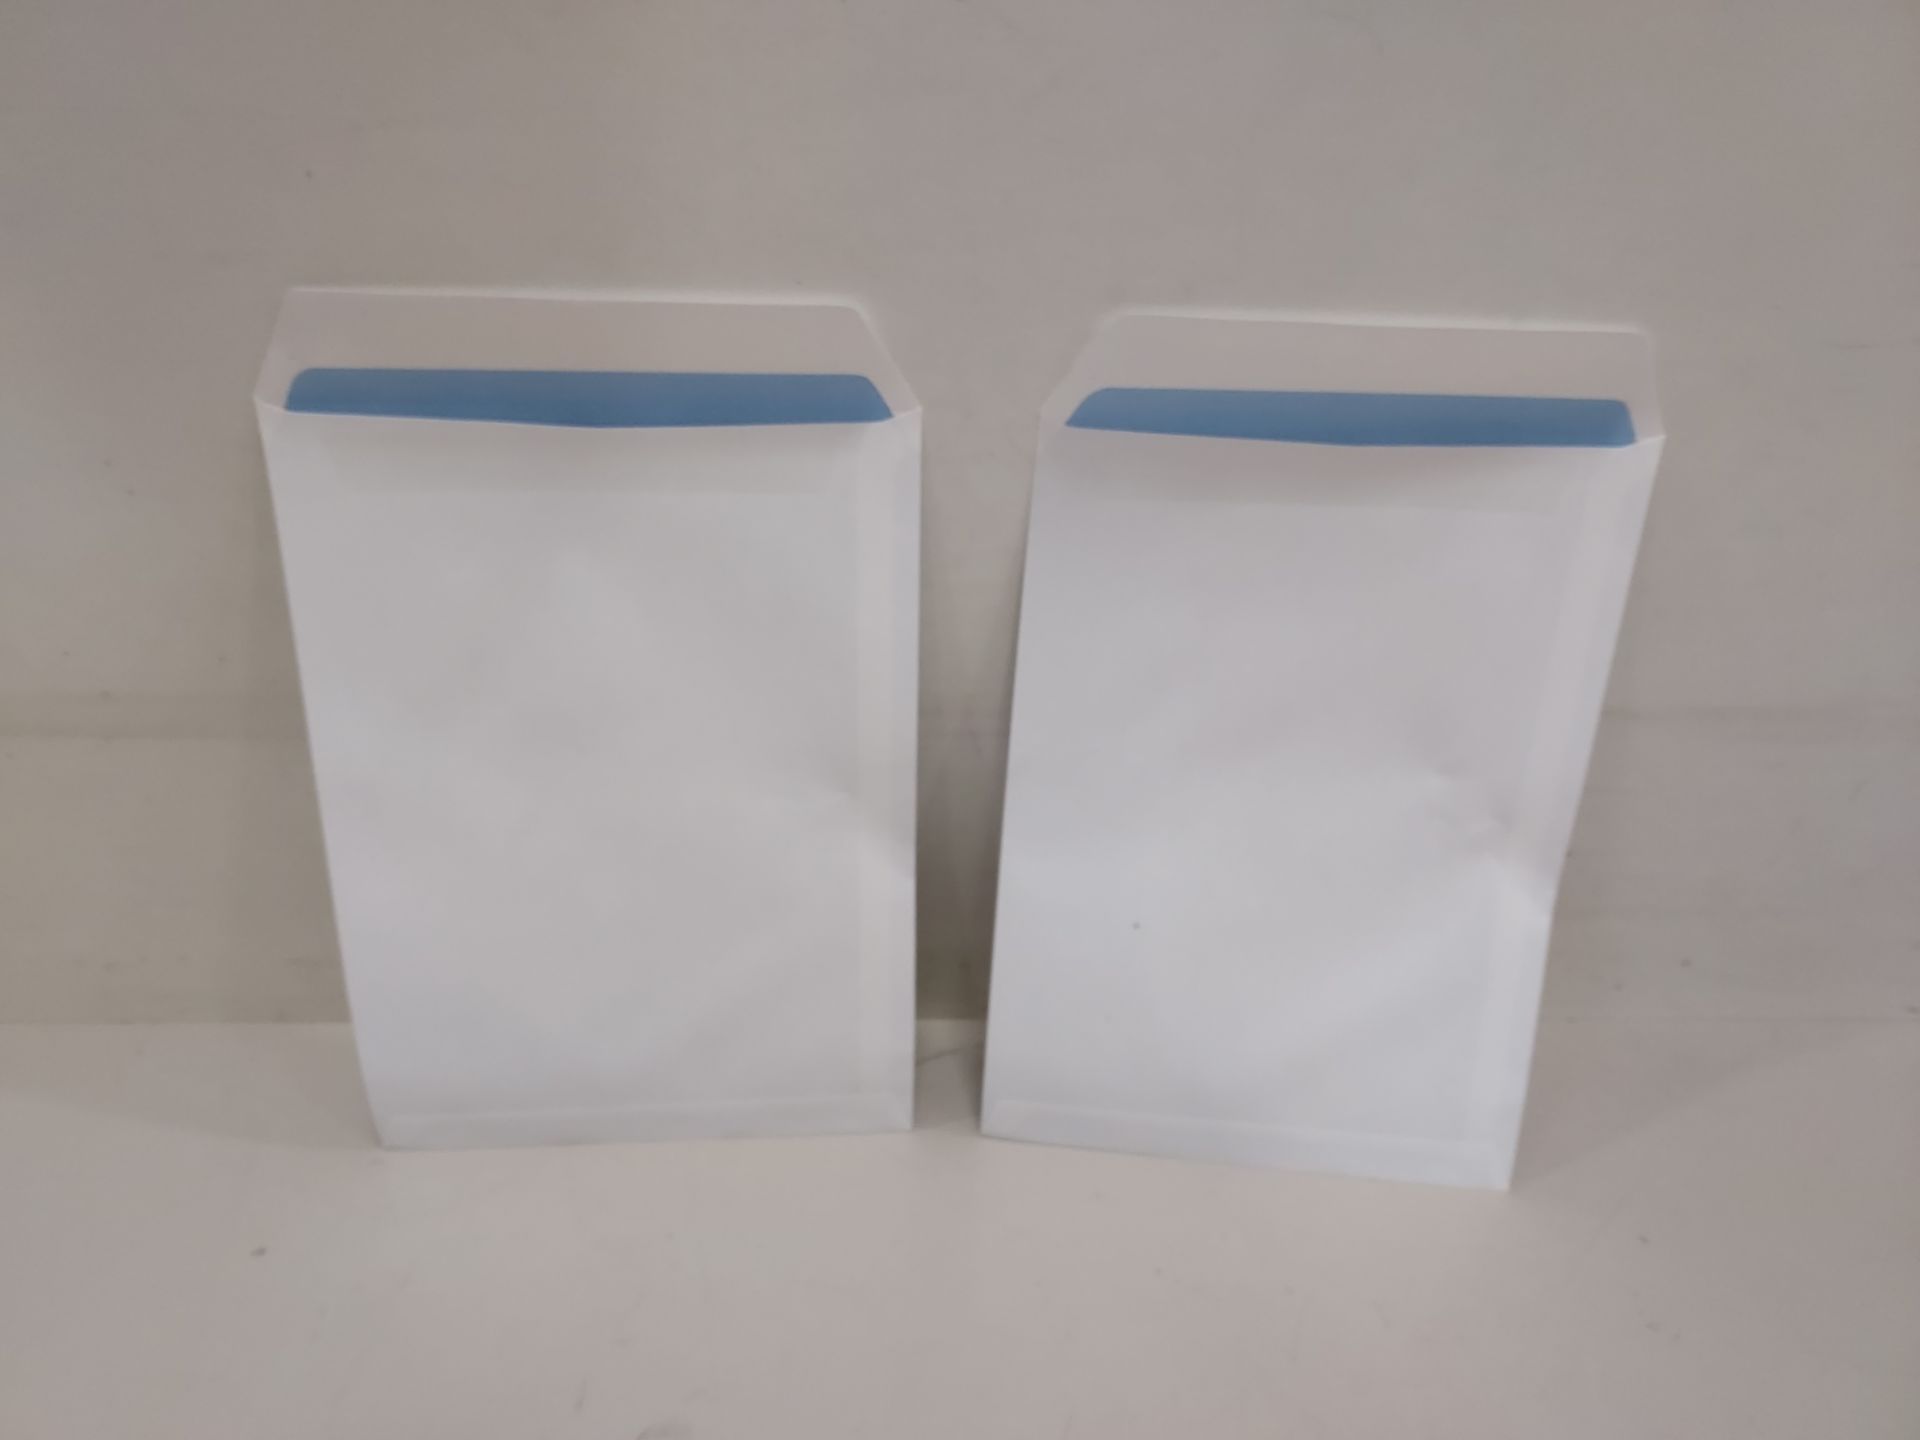 9000 + BRAND NEW ENVELOPES POCKETS - SELF SEAL- FOR A4 PAPER (c4 229 x 324) IN 36 BOXES